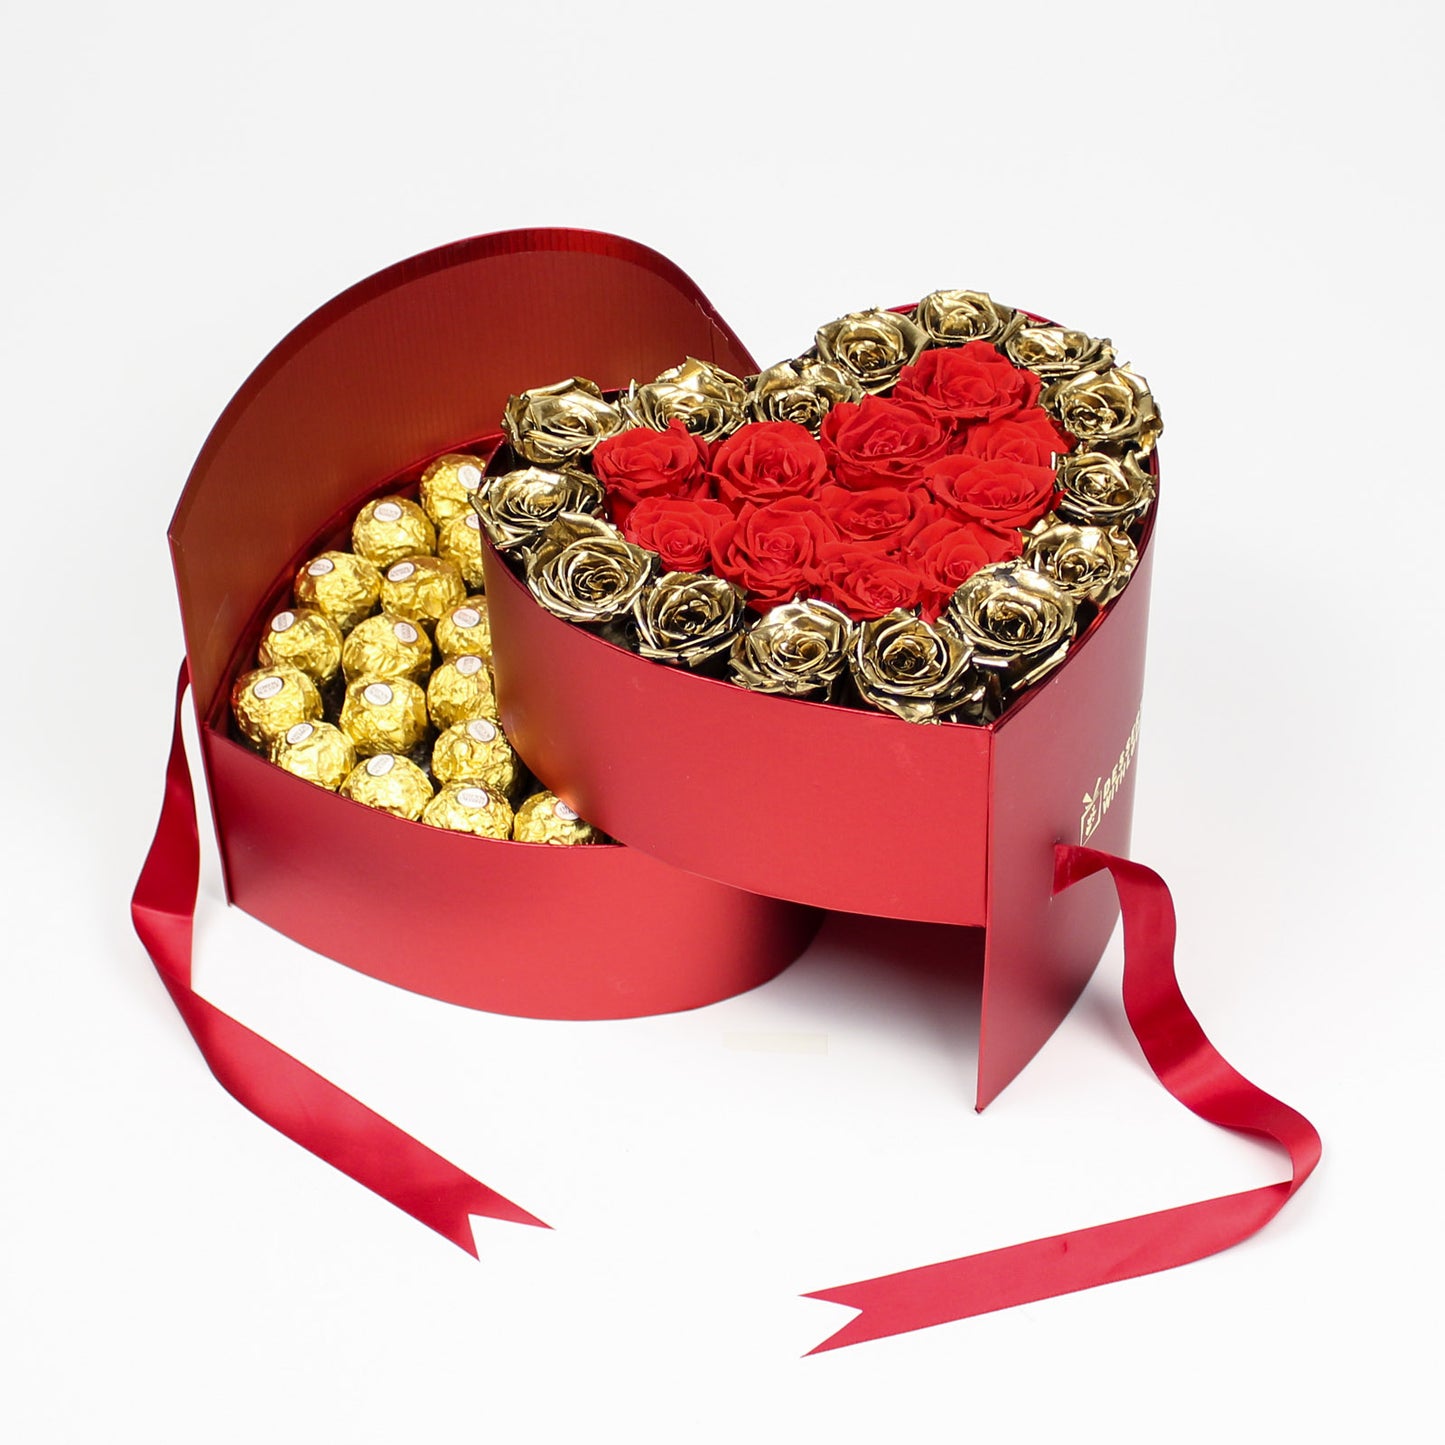 DUAL LAYER RED HEART BOX | RED & GOLD ROSES